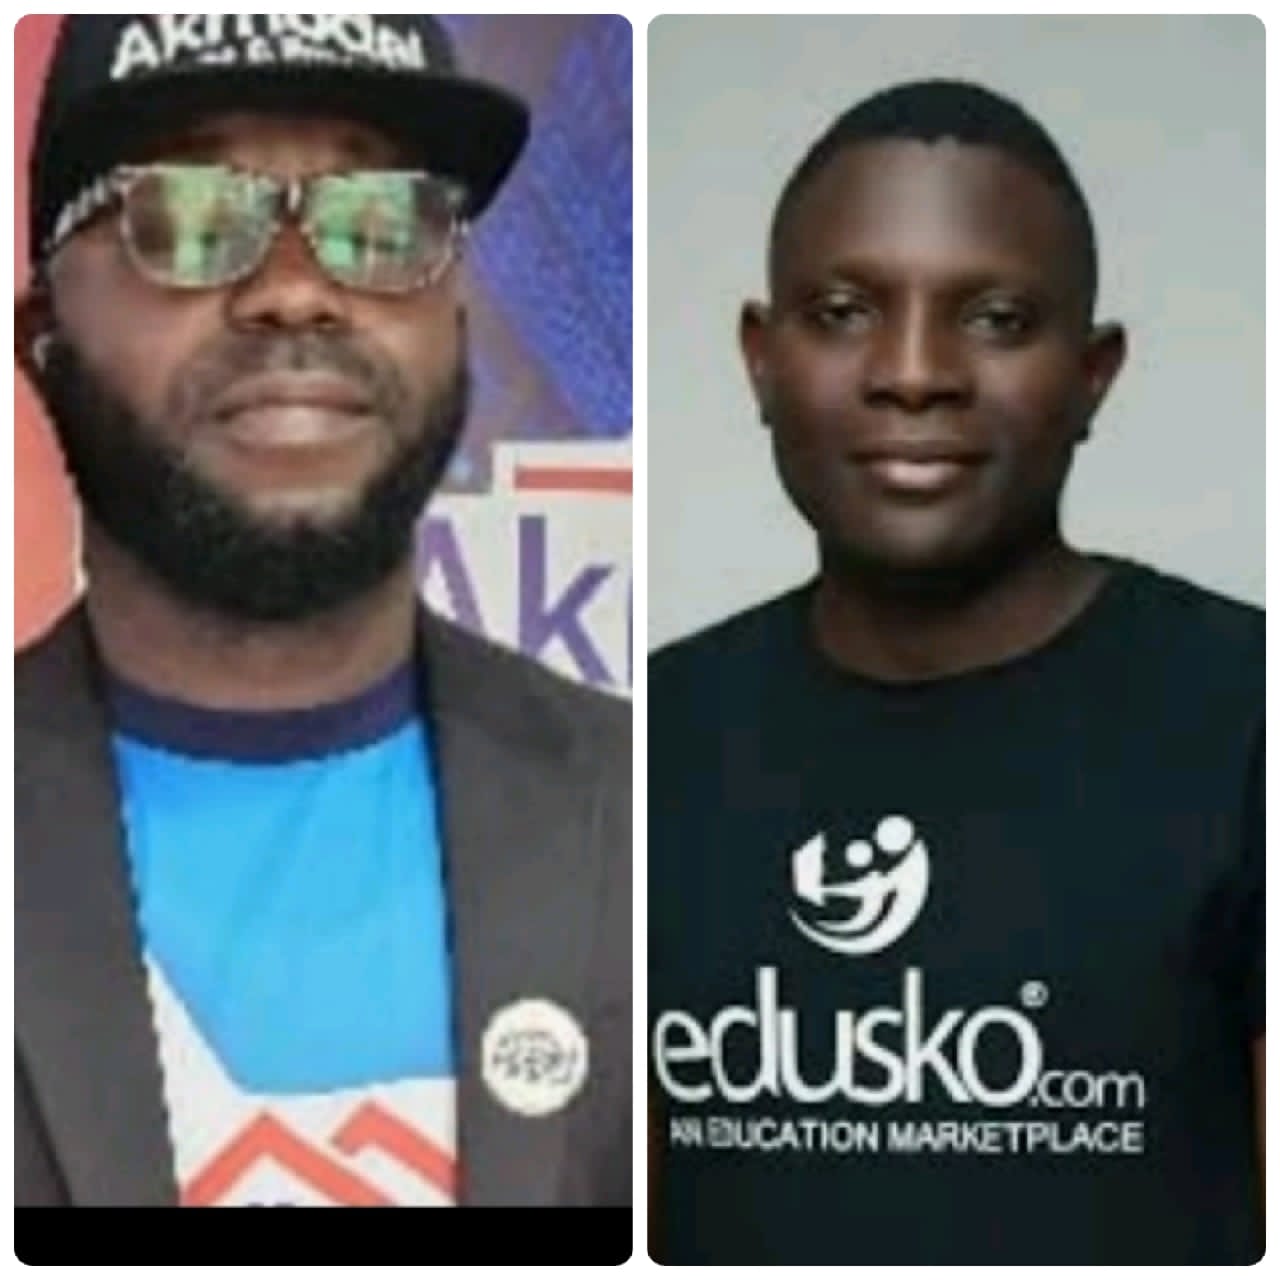 Akmodel Group Partners With Edusko U.K To Support Children's Education In Nigeria